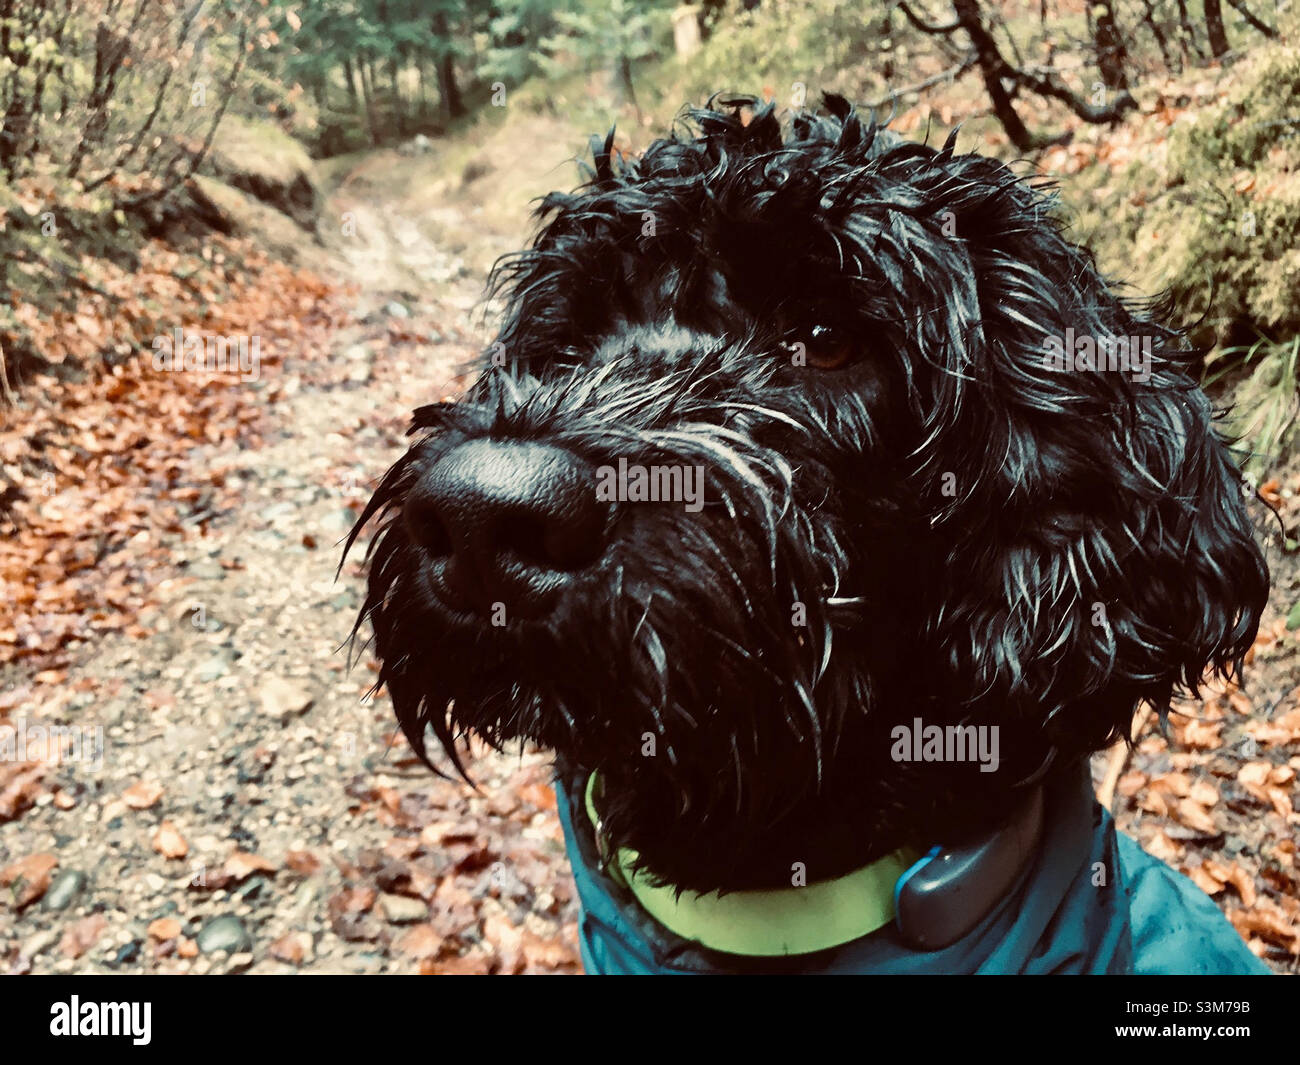 Portuguese waterdog in the forest on a rainy day Stock Photo